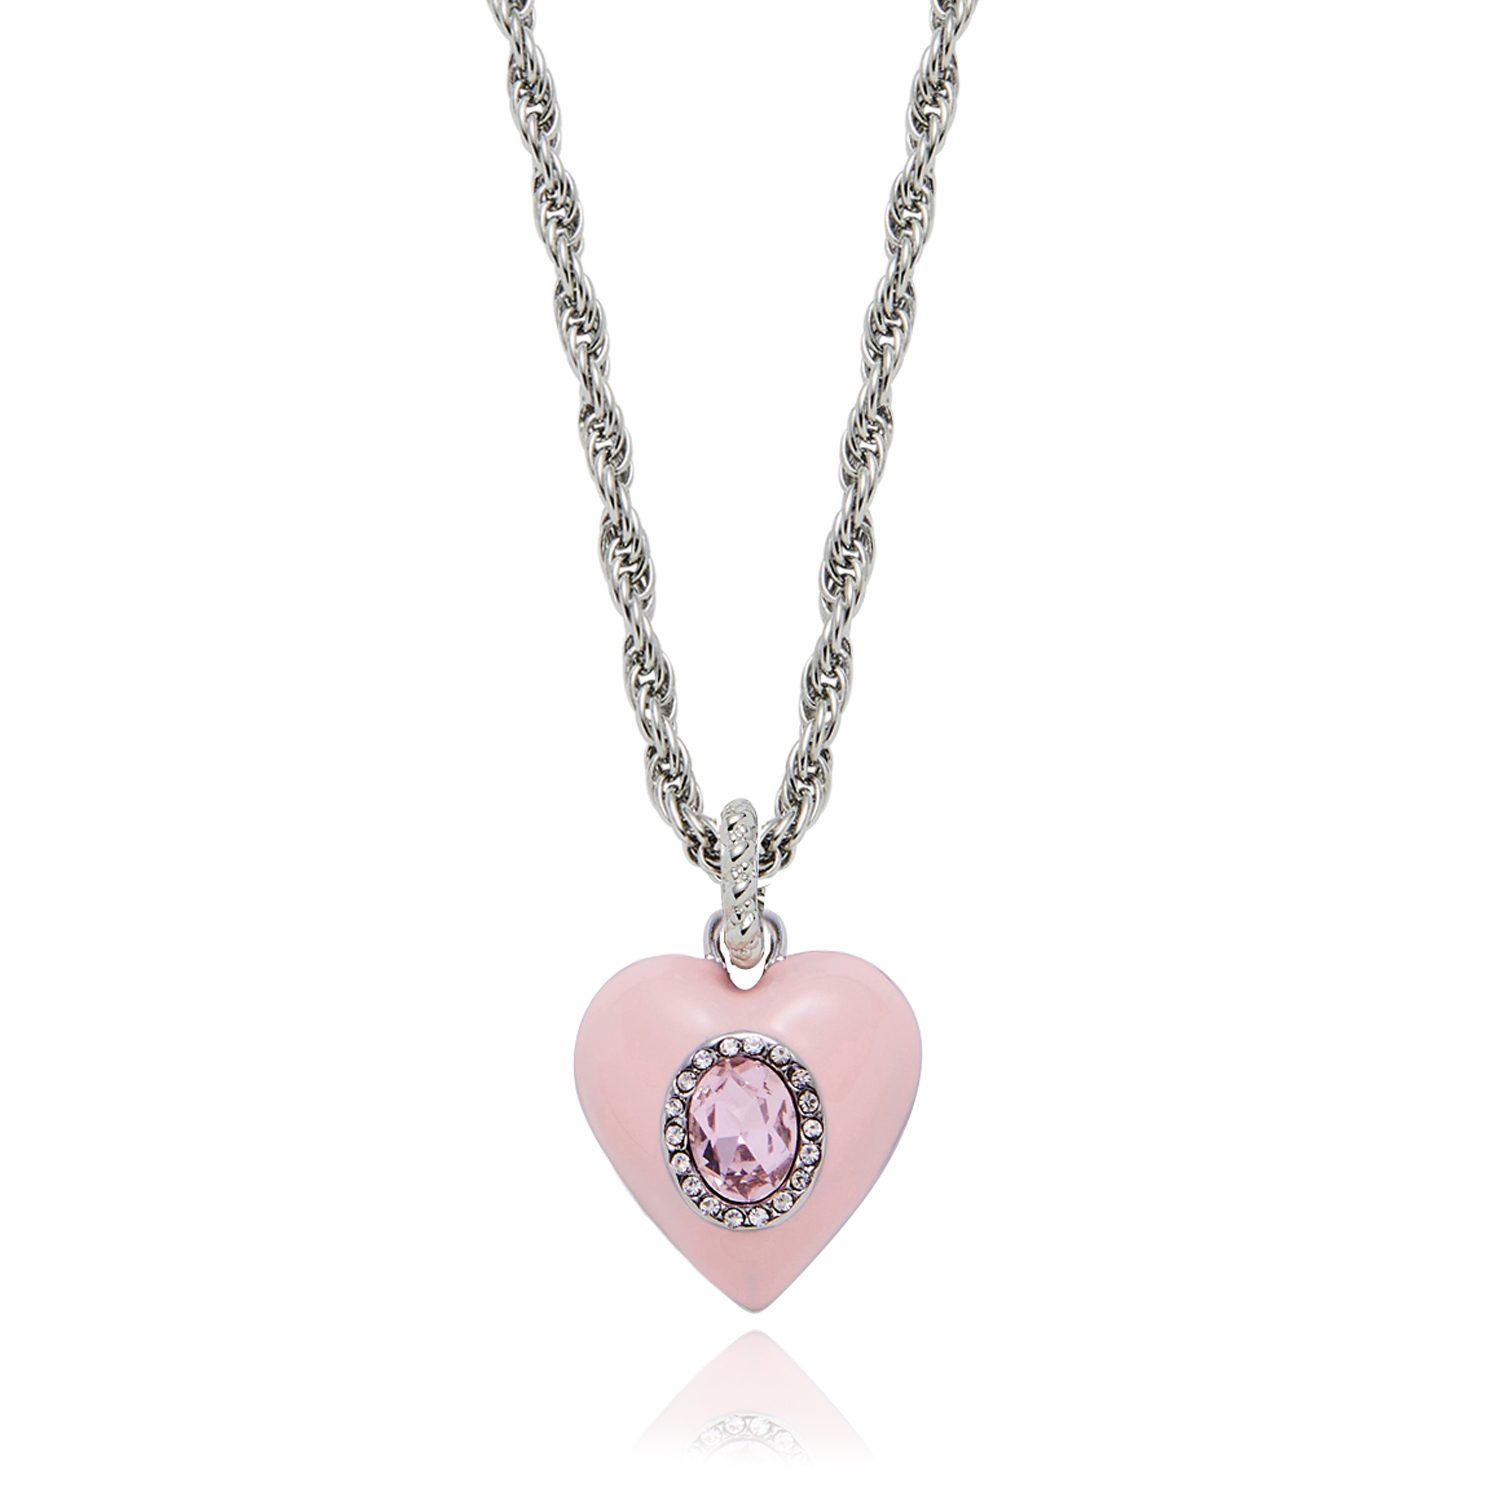 Glossy Heart Pendant Necklace Pink